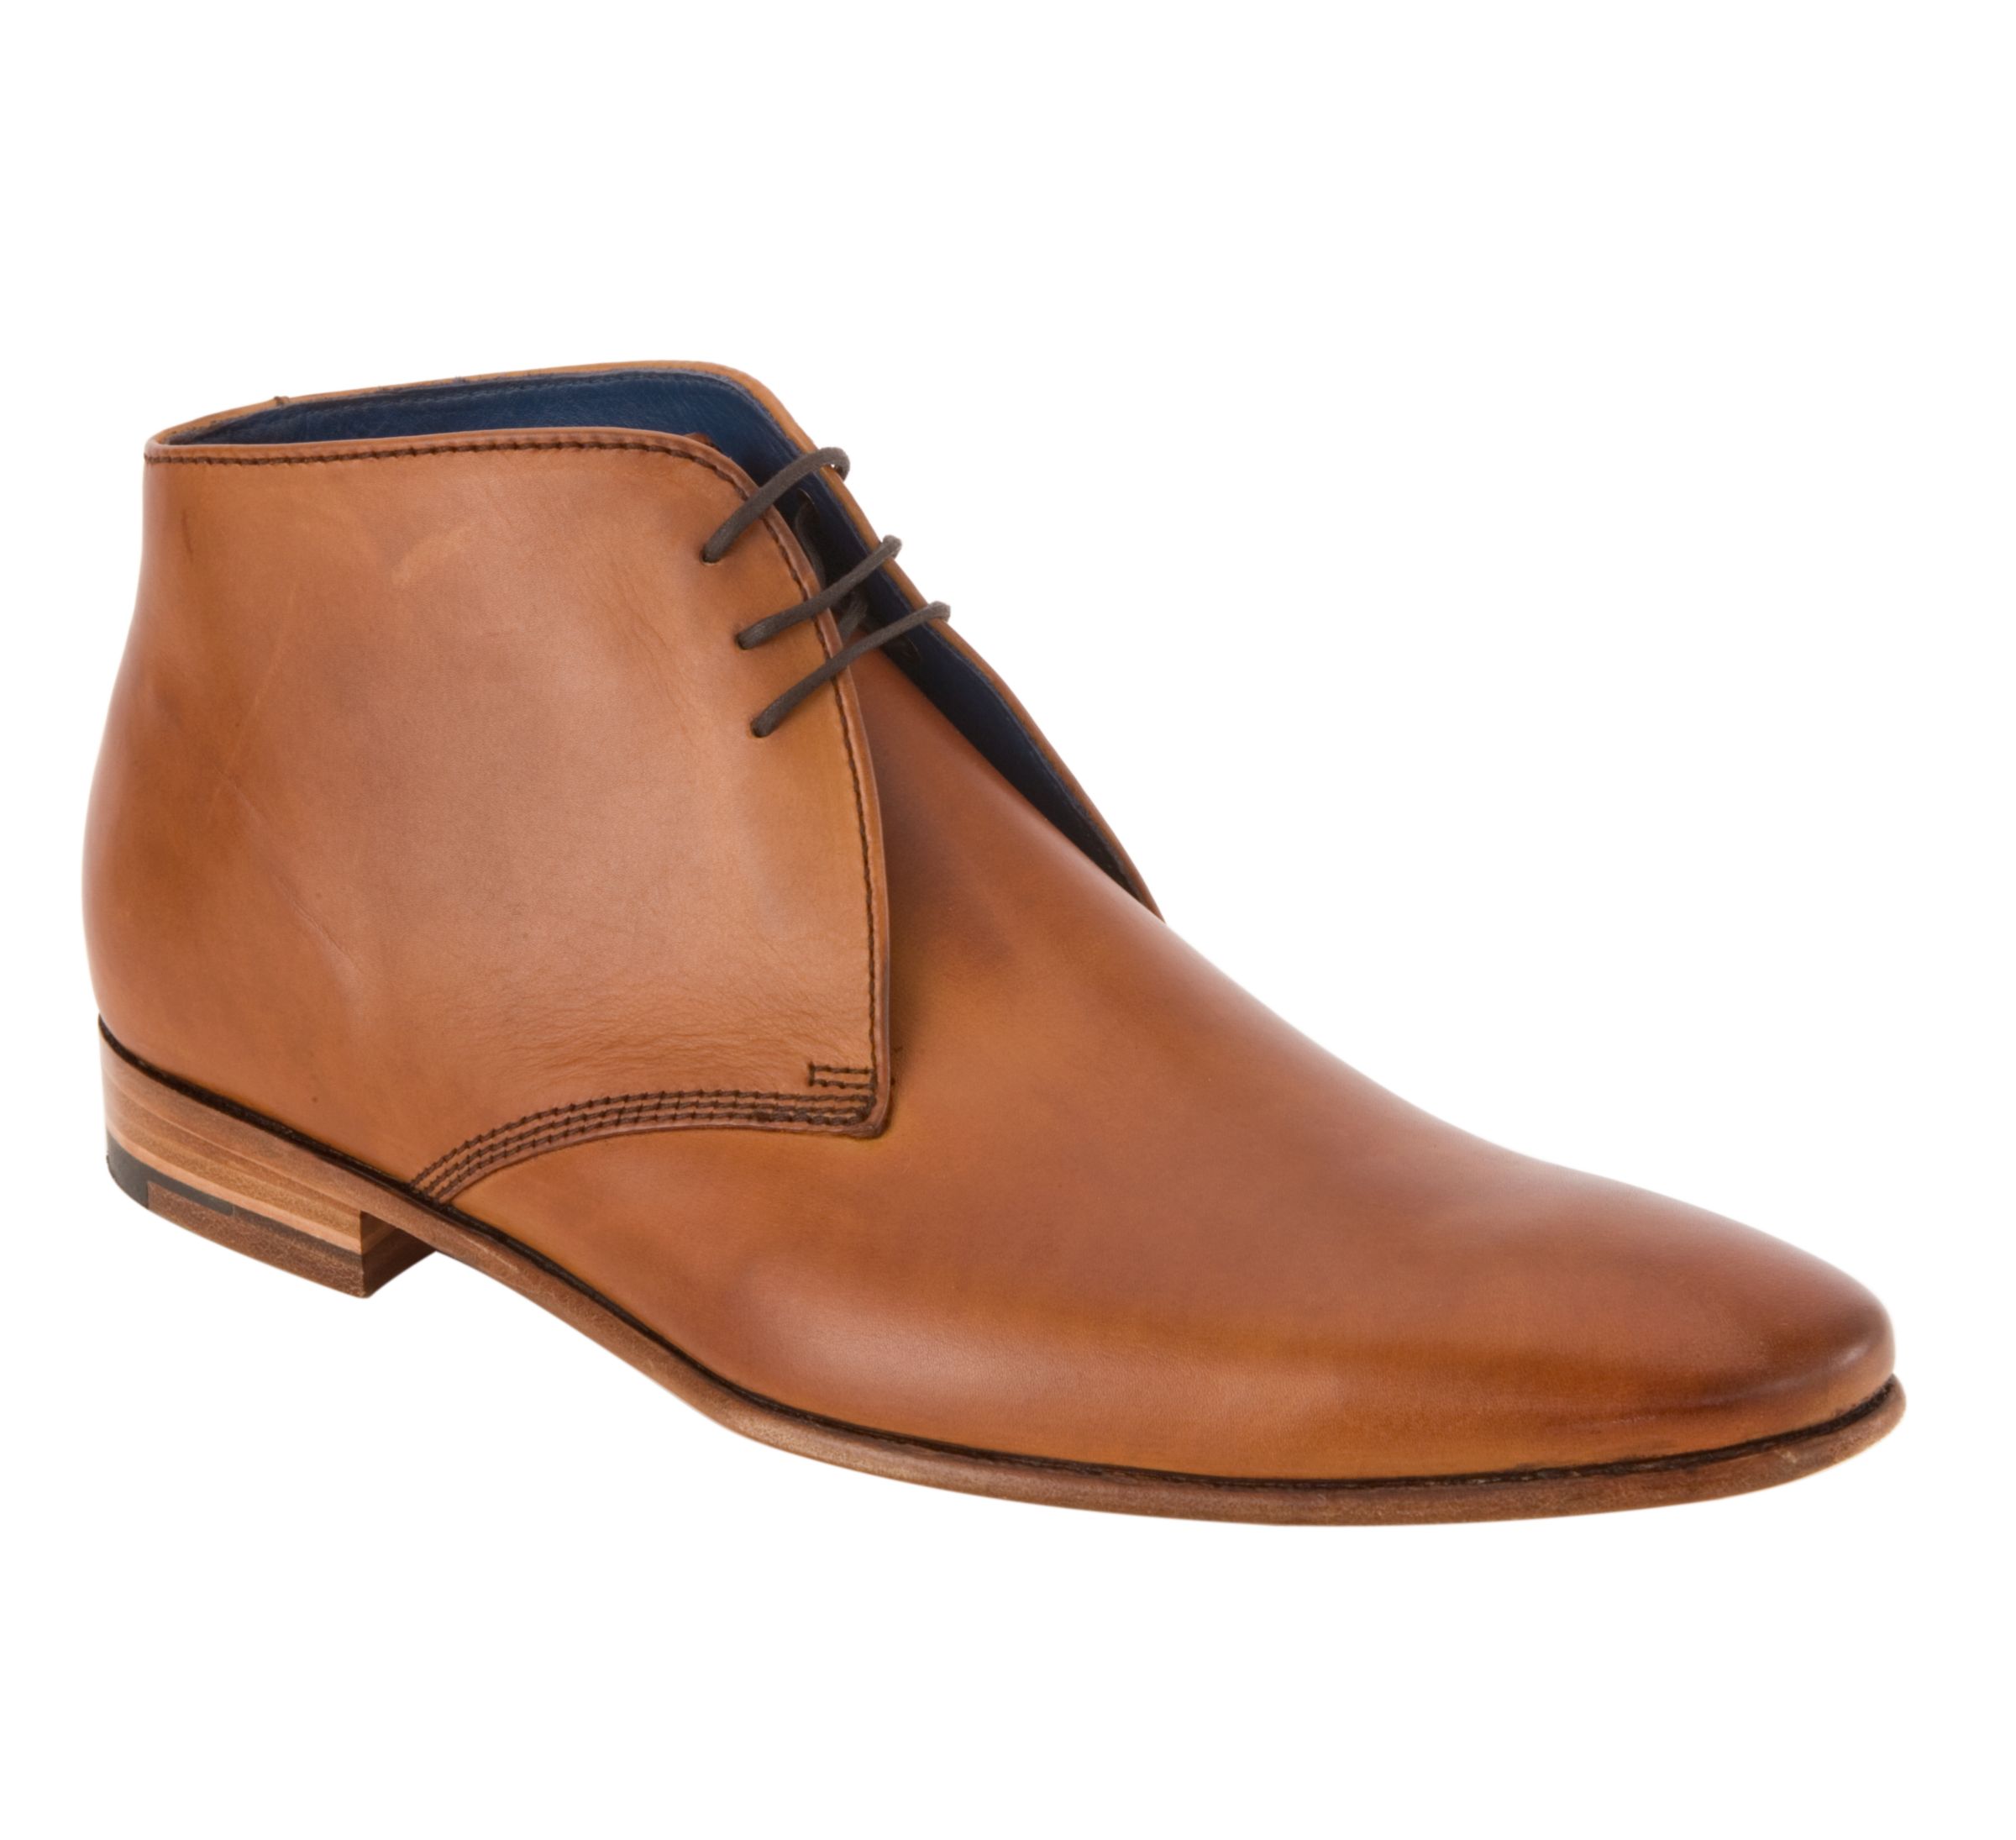 Barker Atwood Leather Boots, Cedar at John Lewis